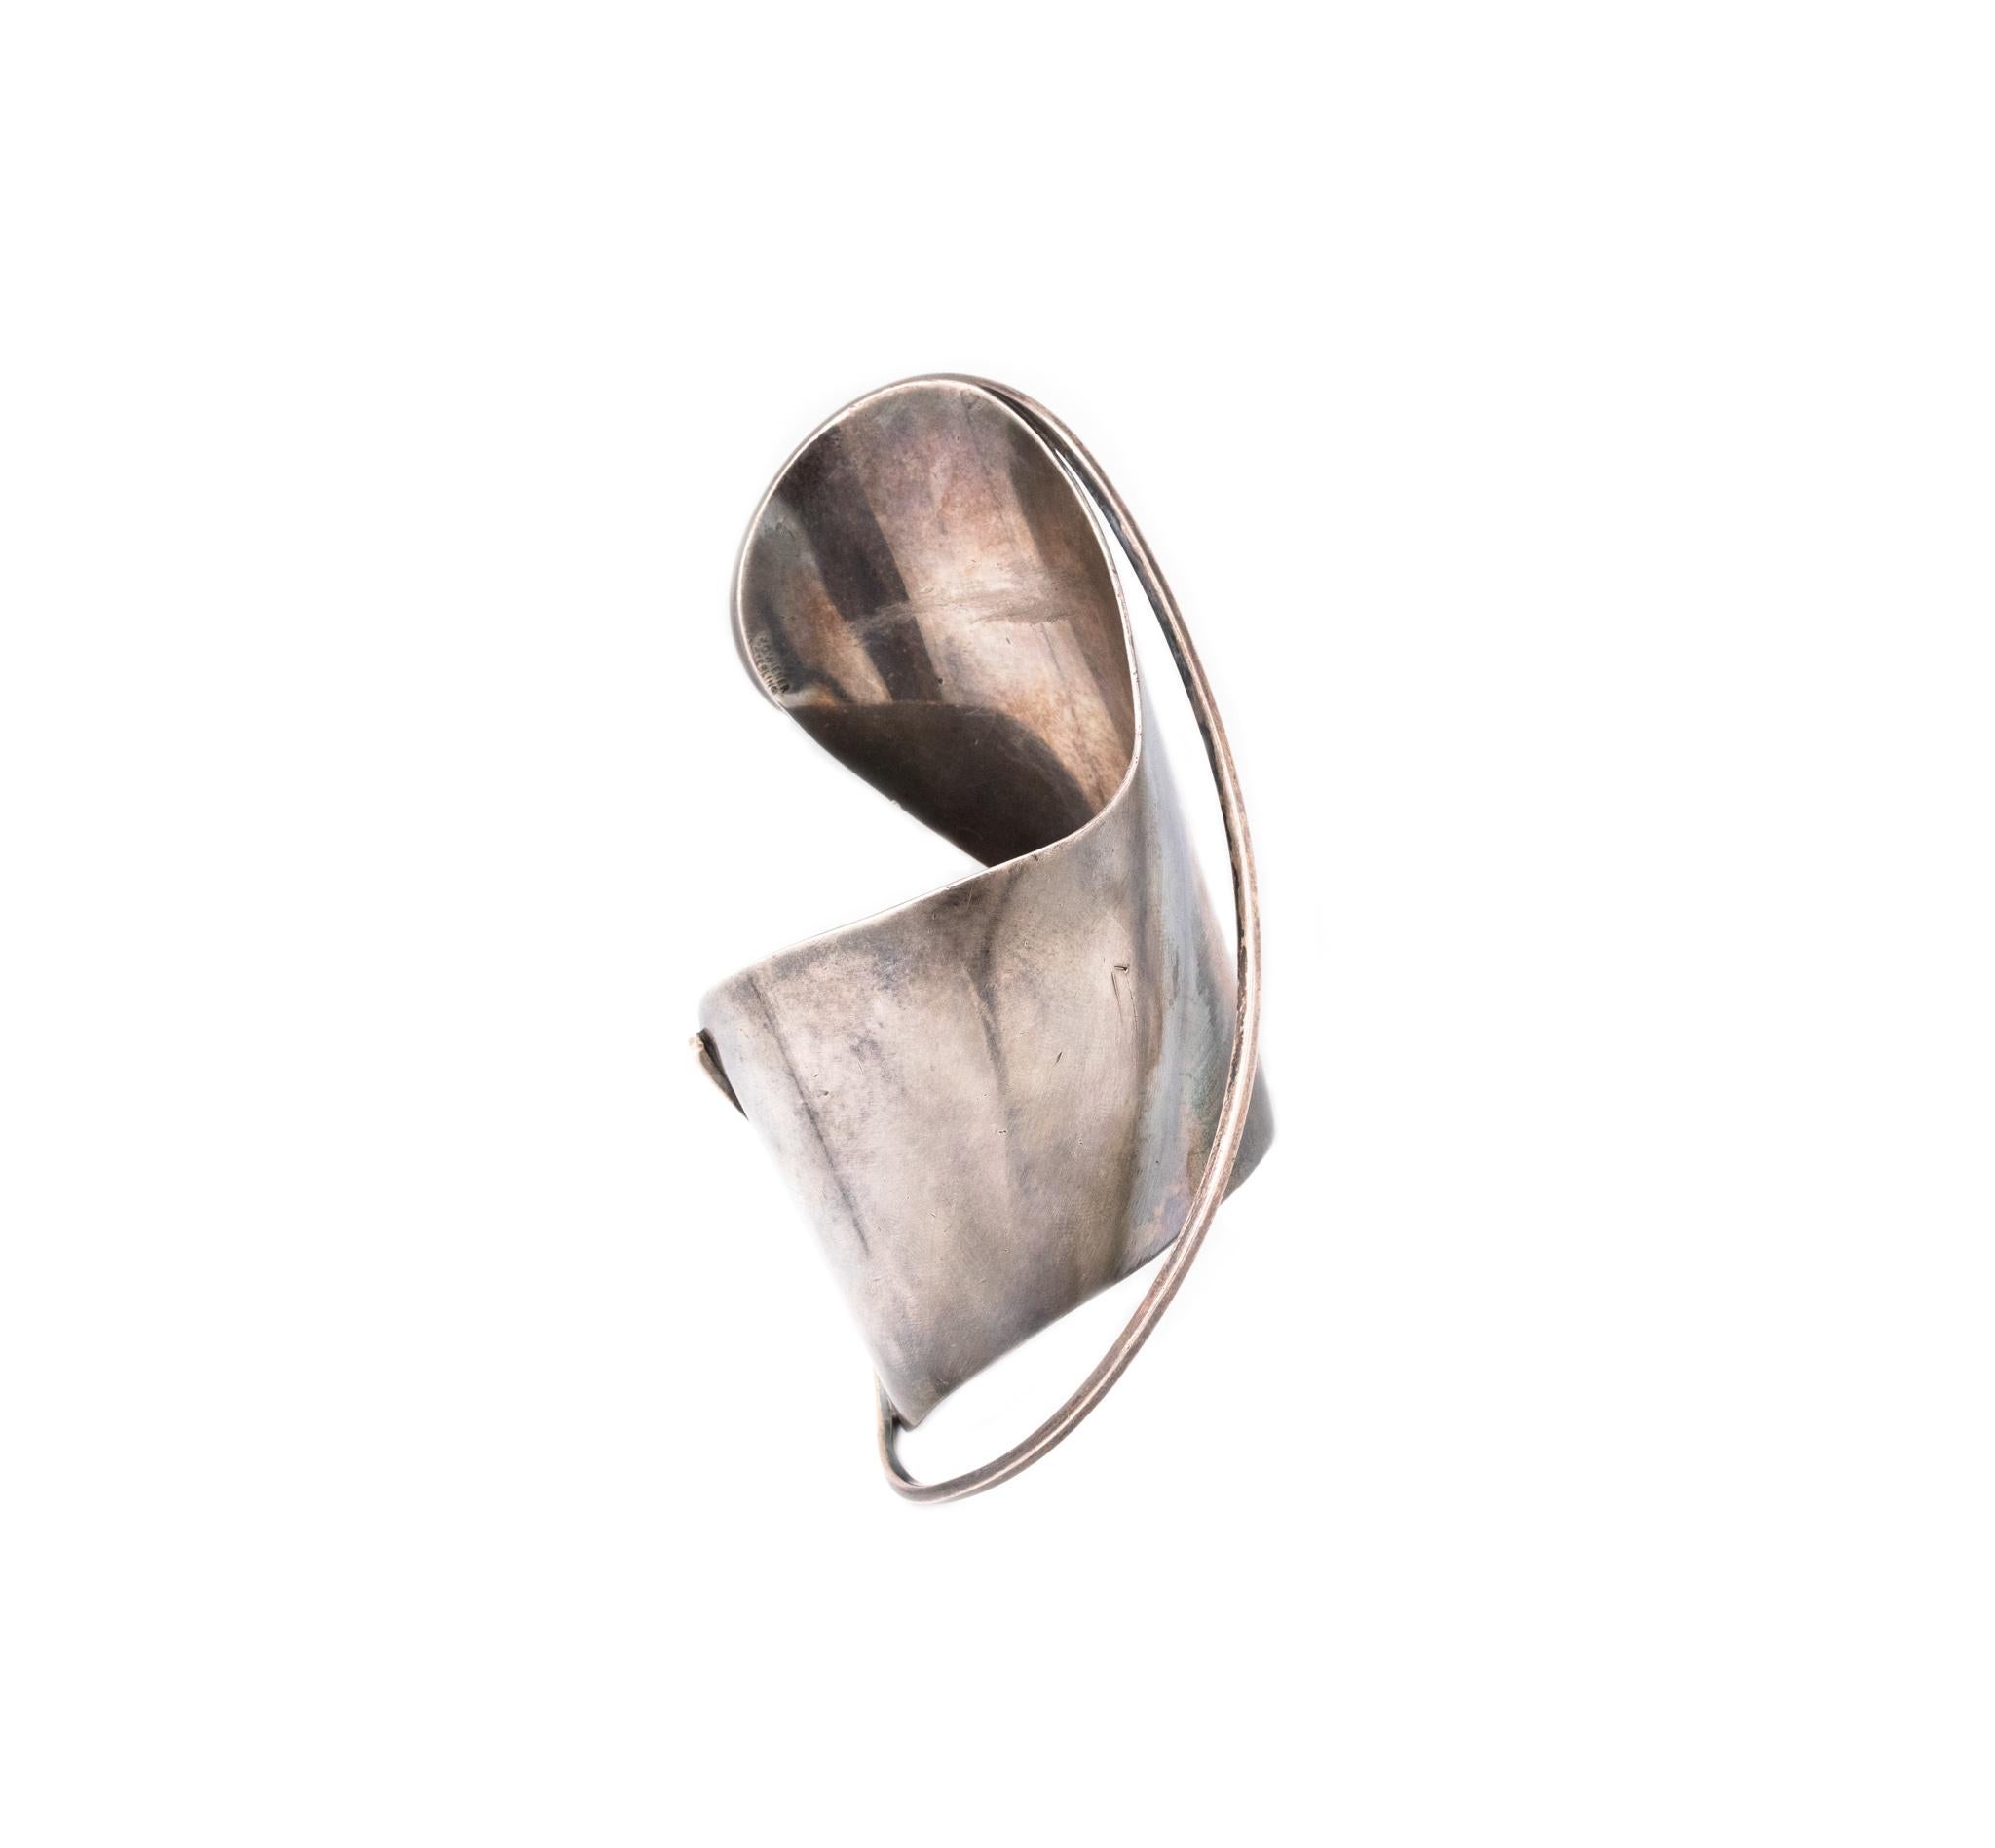 An exceptional cuff designed by Ed Wiener (1918-1991).

This very rare modernist sculptural piece is one of Wiener's first creations as a jeweler-artist, in New York city, circa 1948. This cuff bracelet is composed of two simple aerodynamic pieces